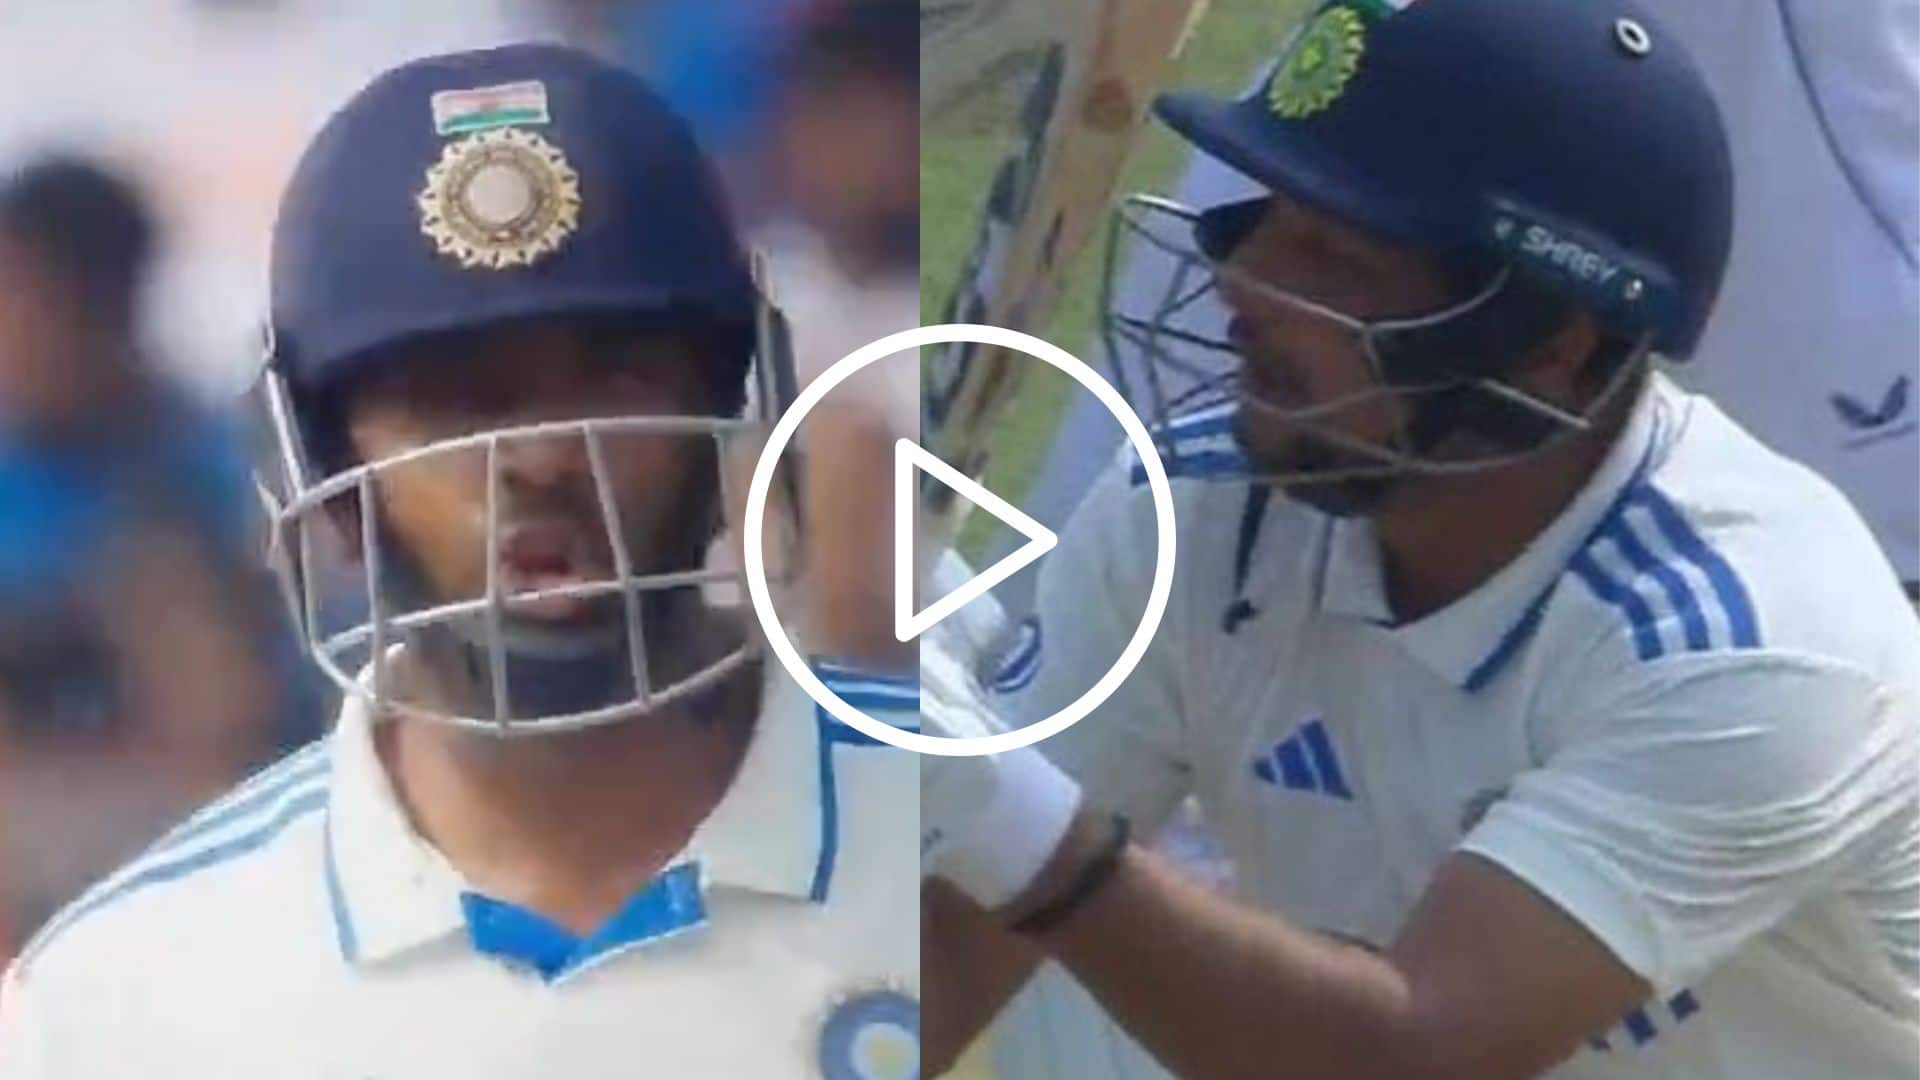 [Watch] Kuldeep Yadav Ignores Ashwin's Advice & Gets Out On Next Ball With Disastrous Shot